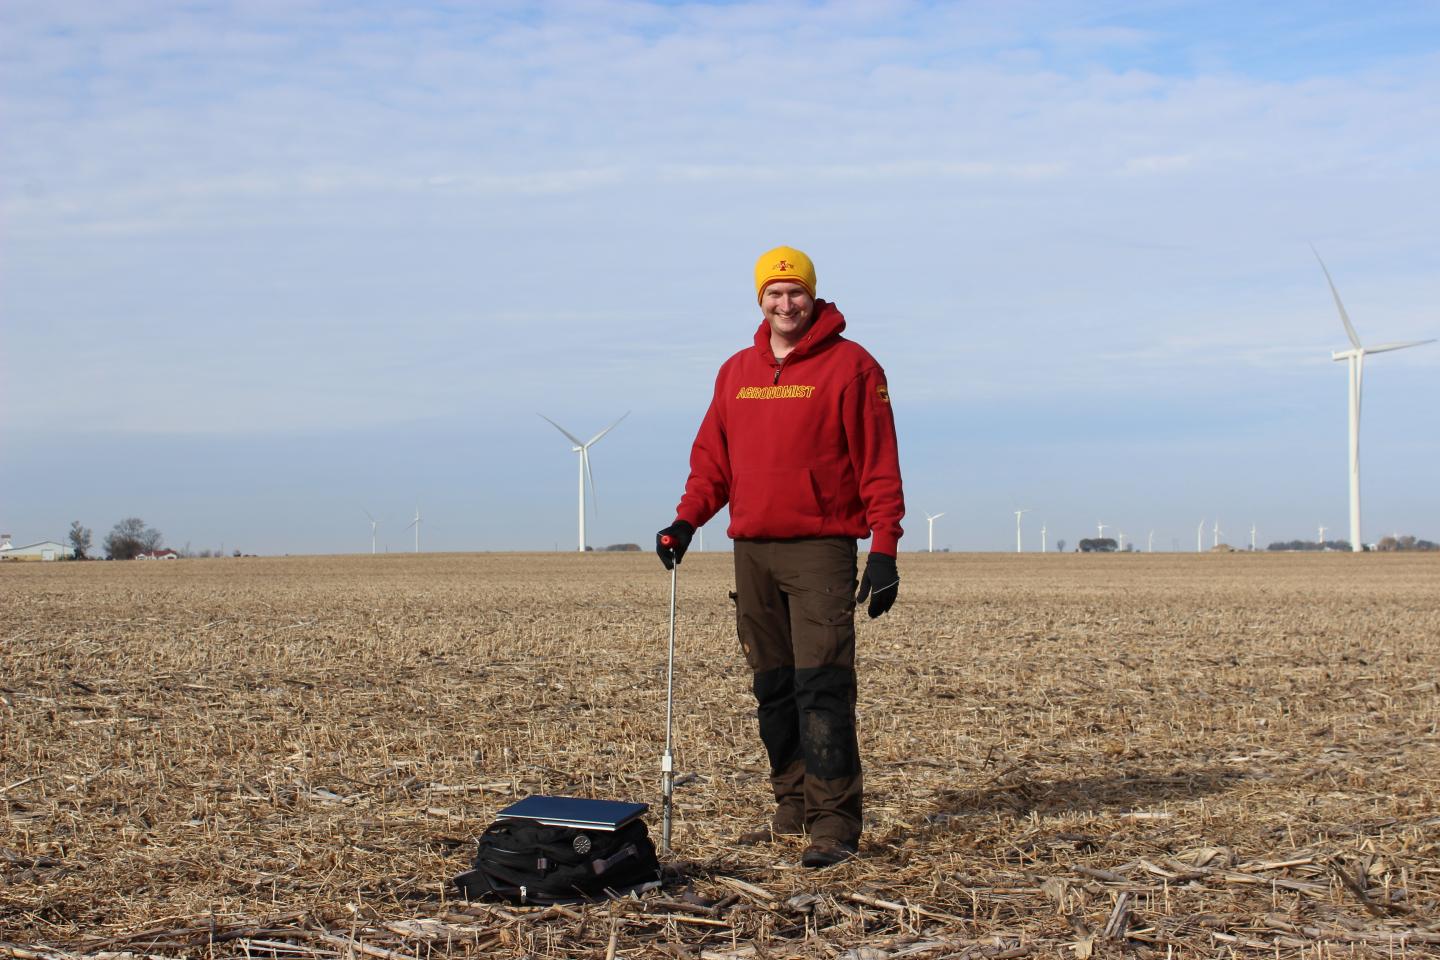 Bradley Miller takes soil samples from a field. Part of Miller's research aims to bridge geomorphology, or the study of how landforms change over time, with soil science